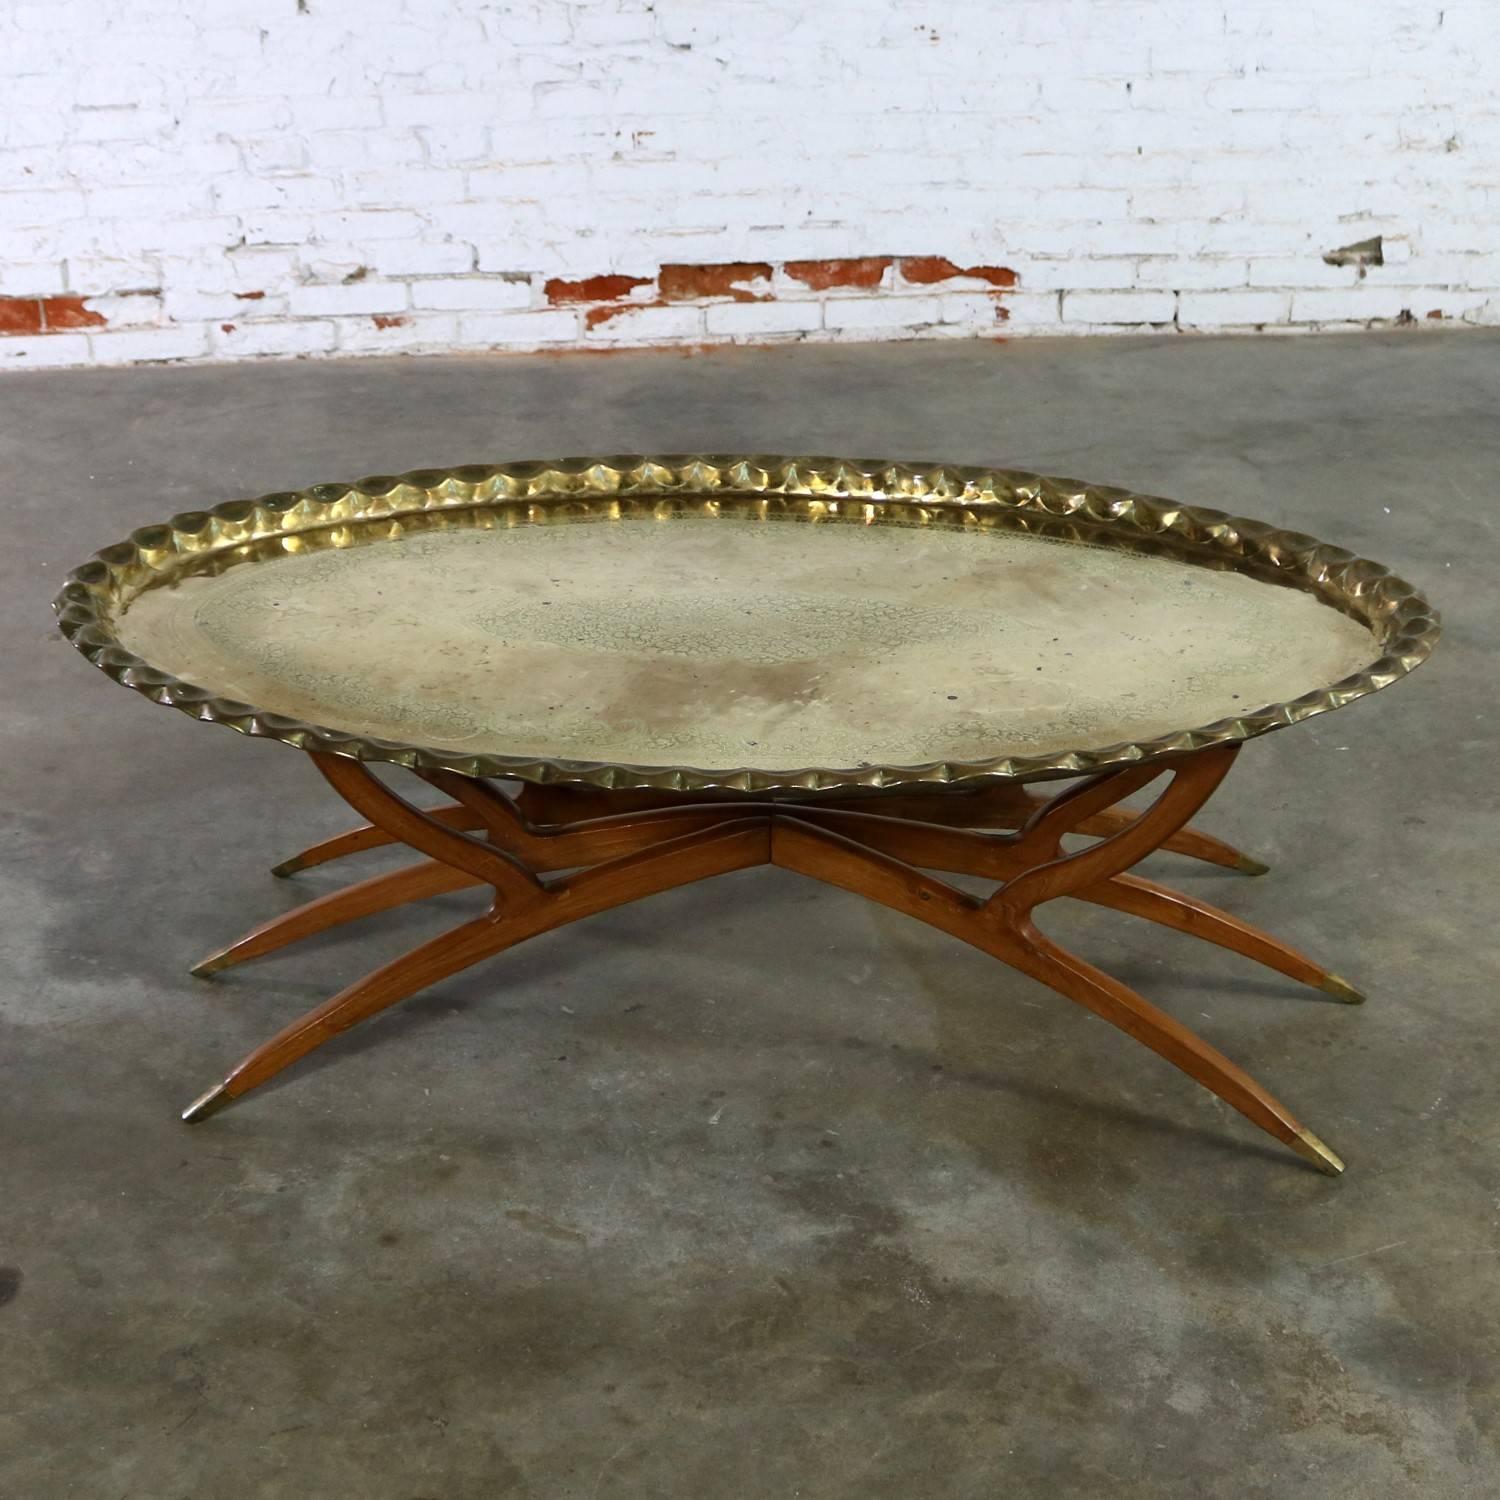 Handsome vintage Moroccan style oval brass tray coffee table on spider legs made in India. This rather campaign style coffee table is in fabulous vintage condition with a gorgeous patina, including scratches and spotting, that only comes with age